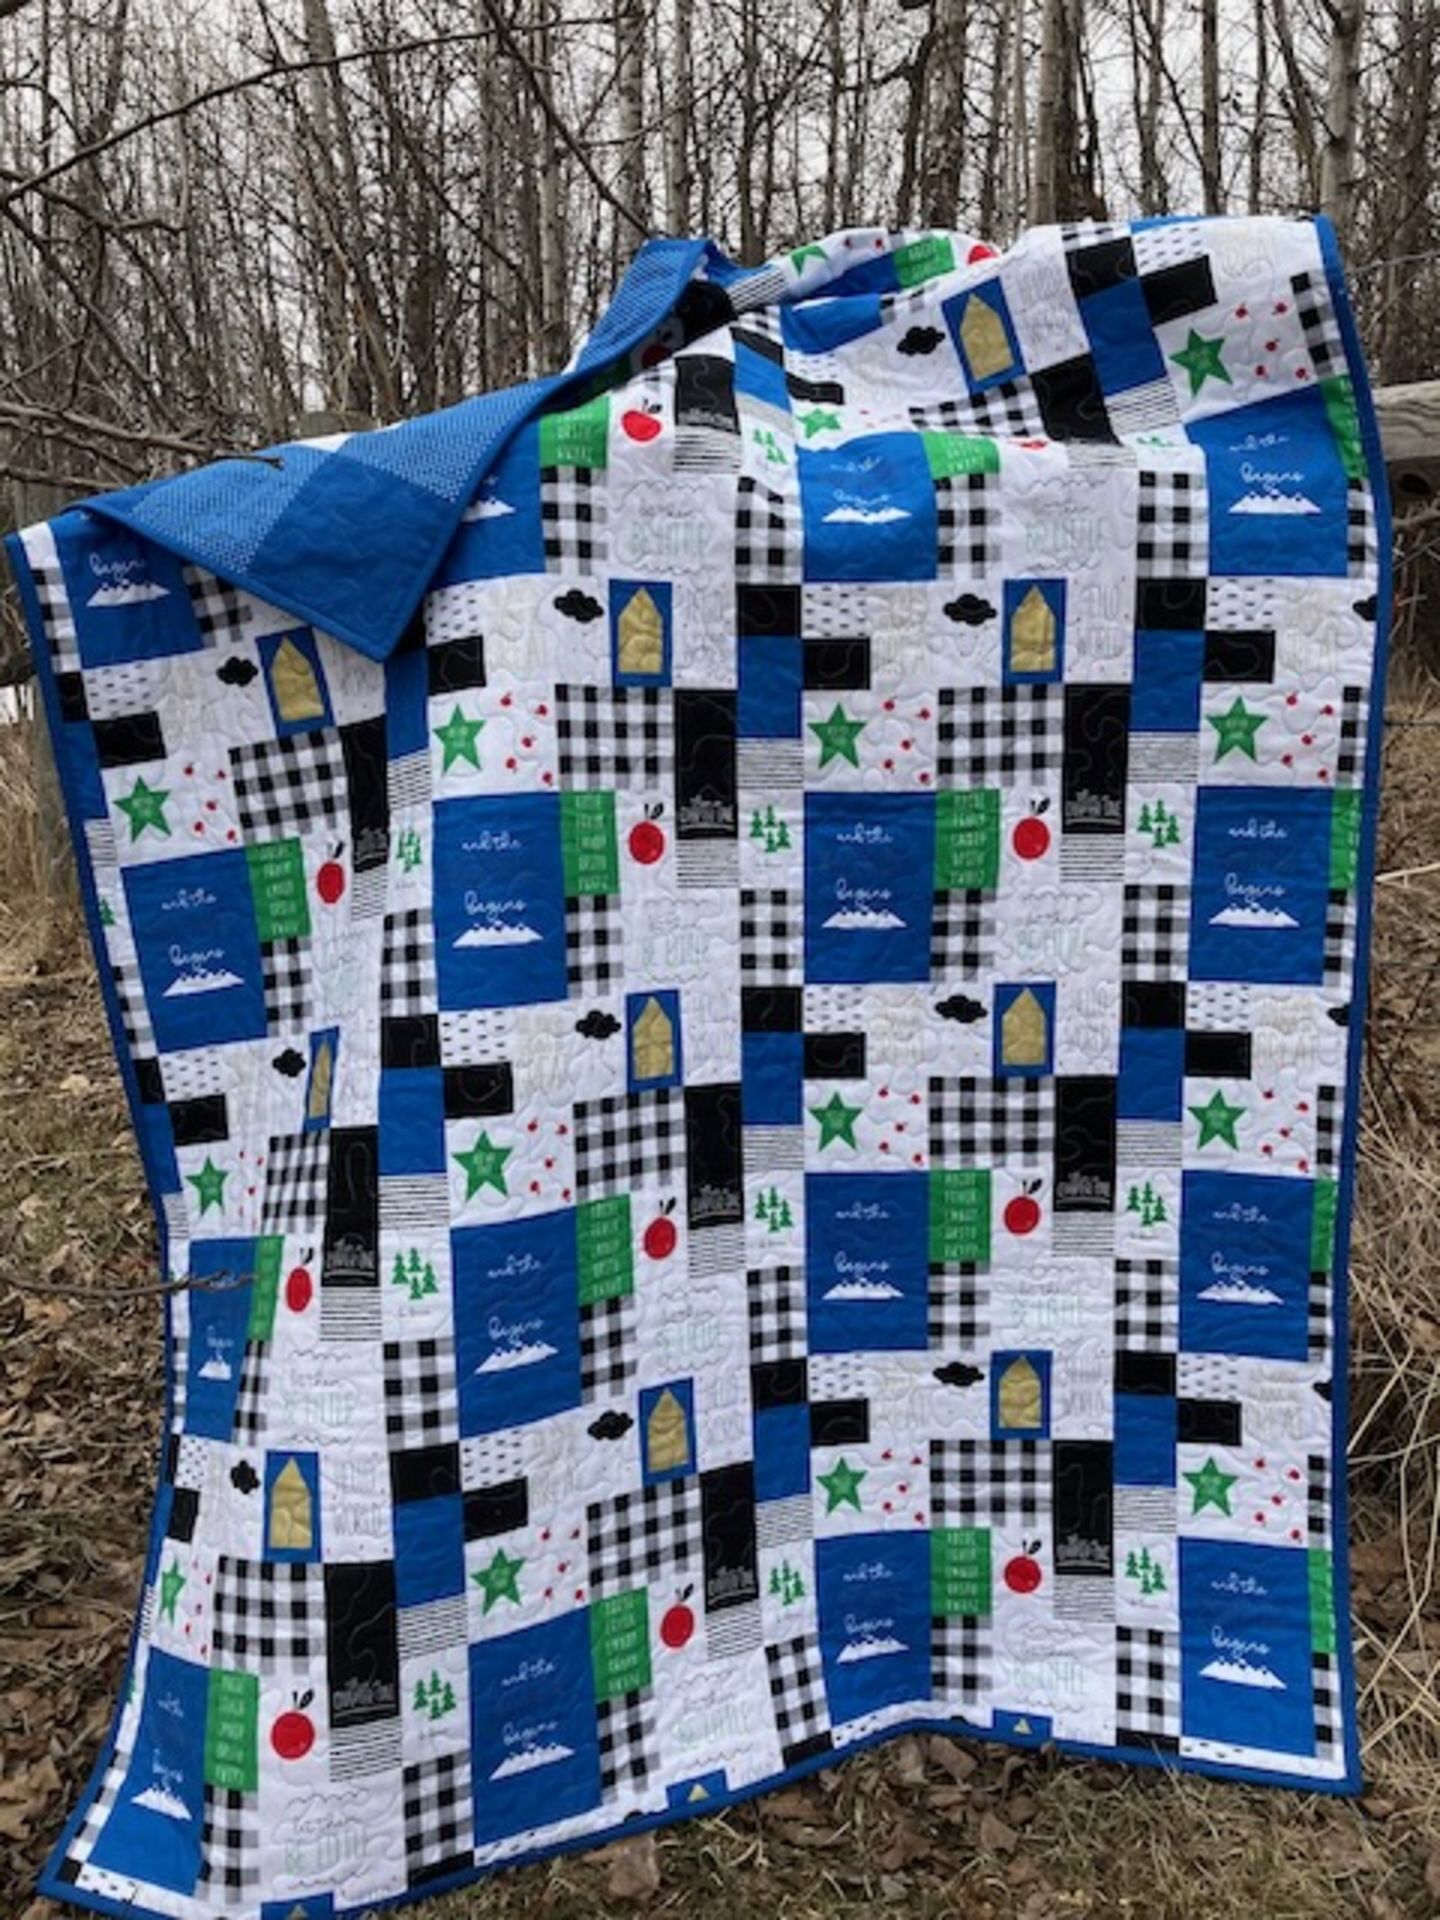 HOMEMADE GINGHAM QUILT (40 1/2" x 58 1/2") - Image 3 of 4